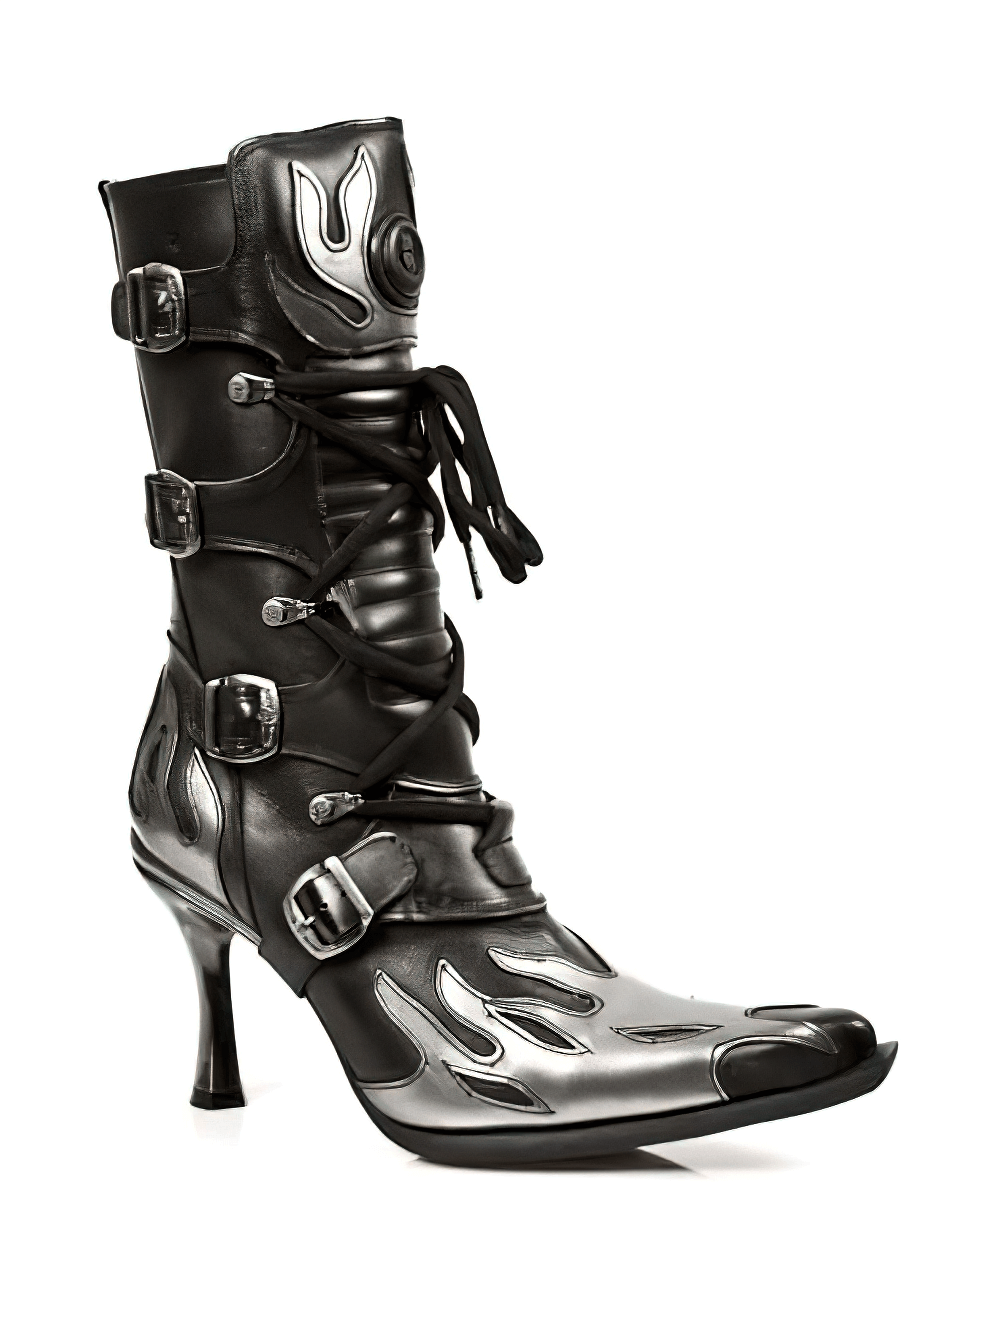 NEW ROCK Edgy Black Buckled Boots with Metallic Heels